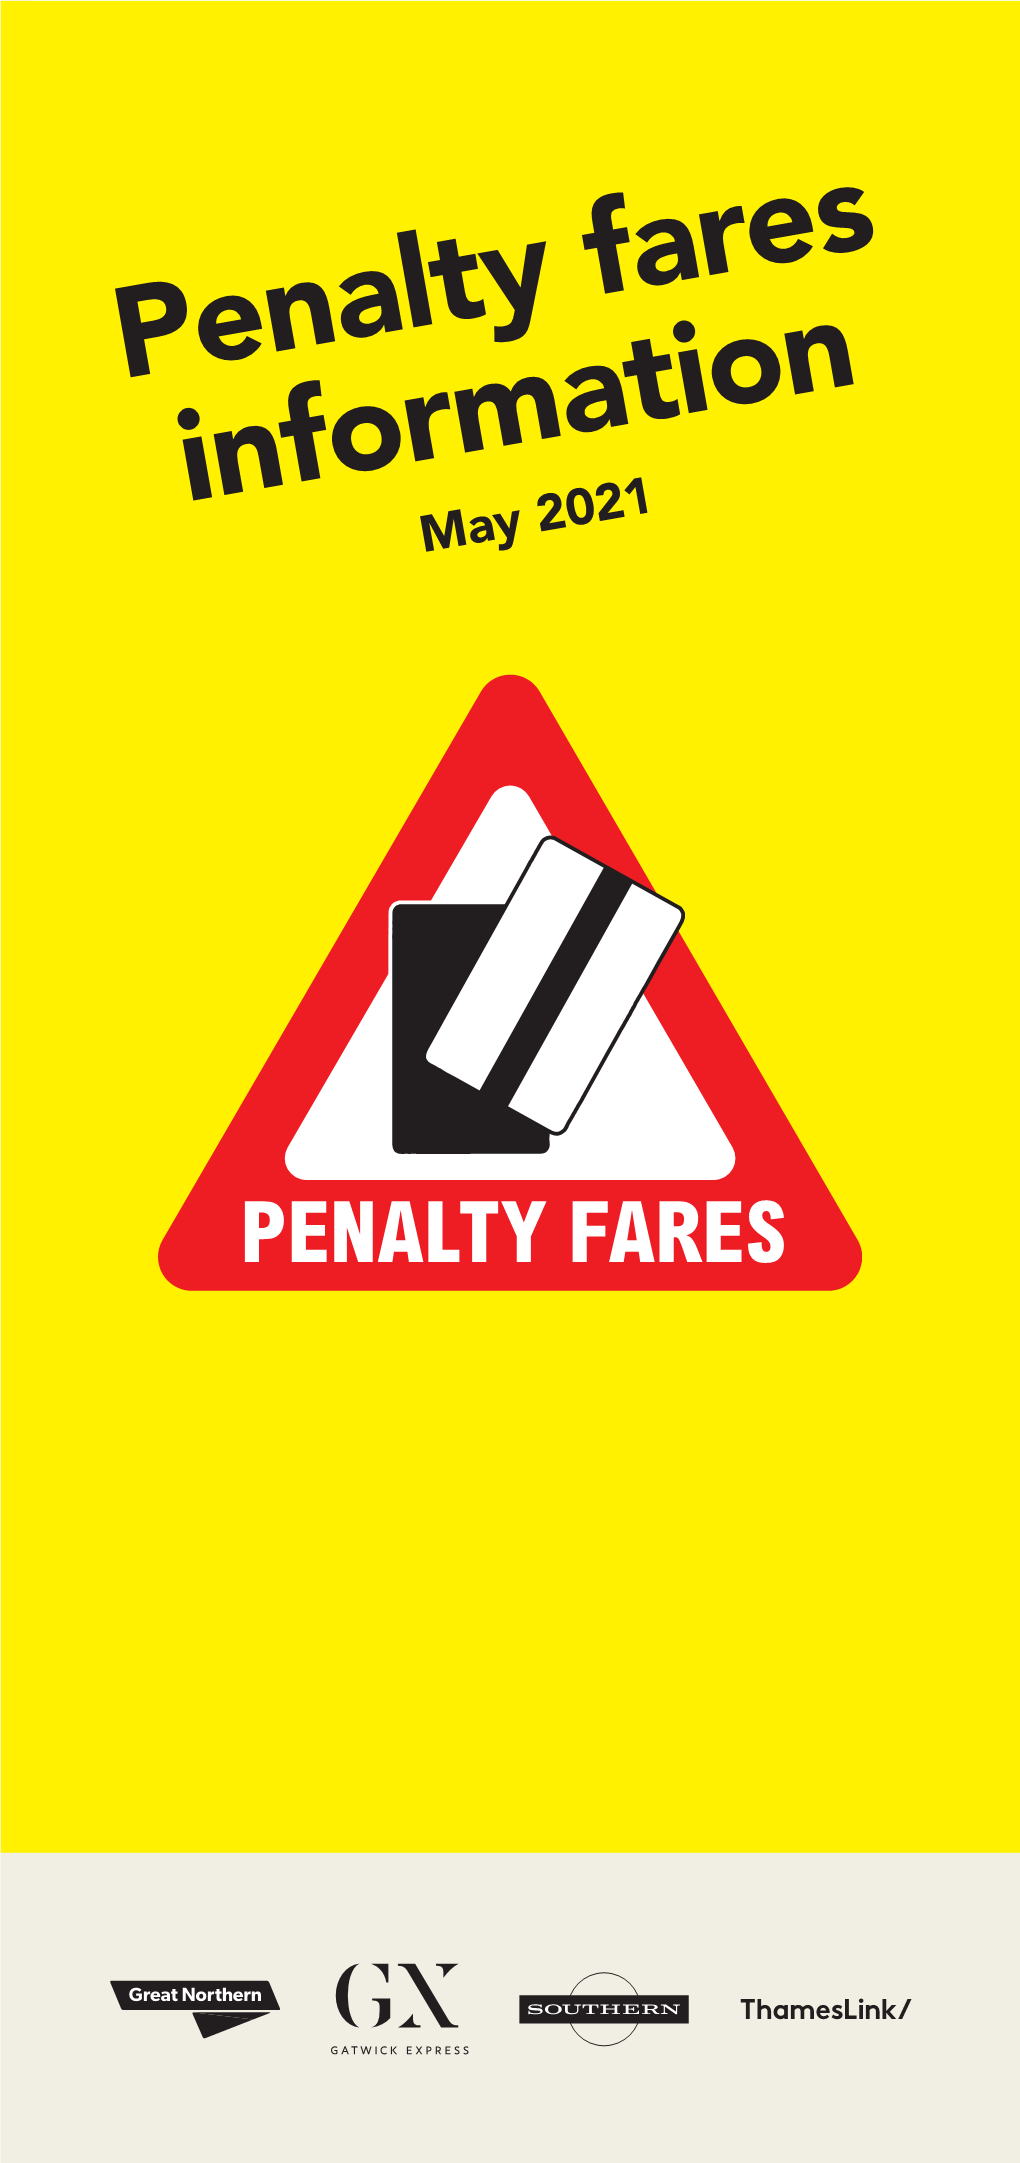 Download the Penalty Fares Leaflet